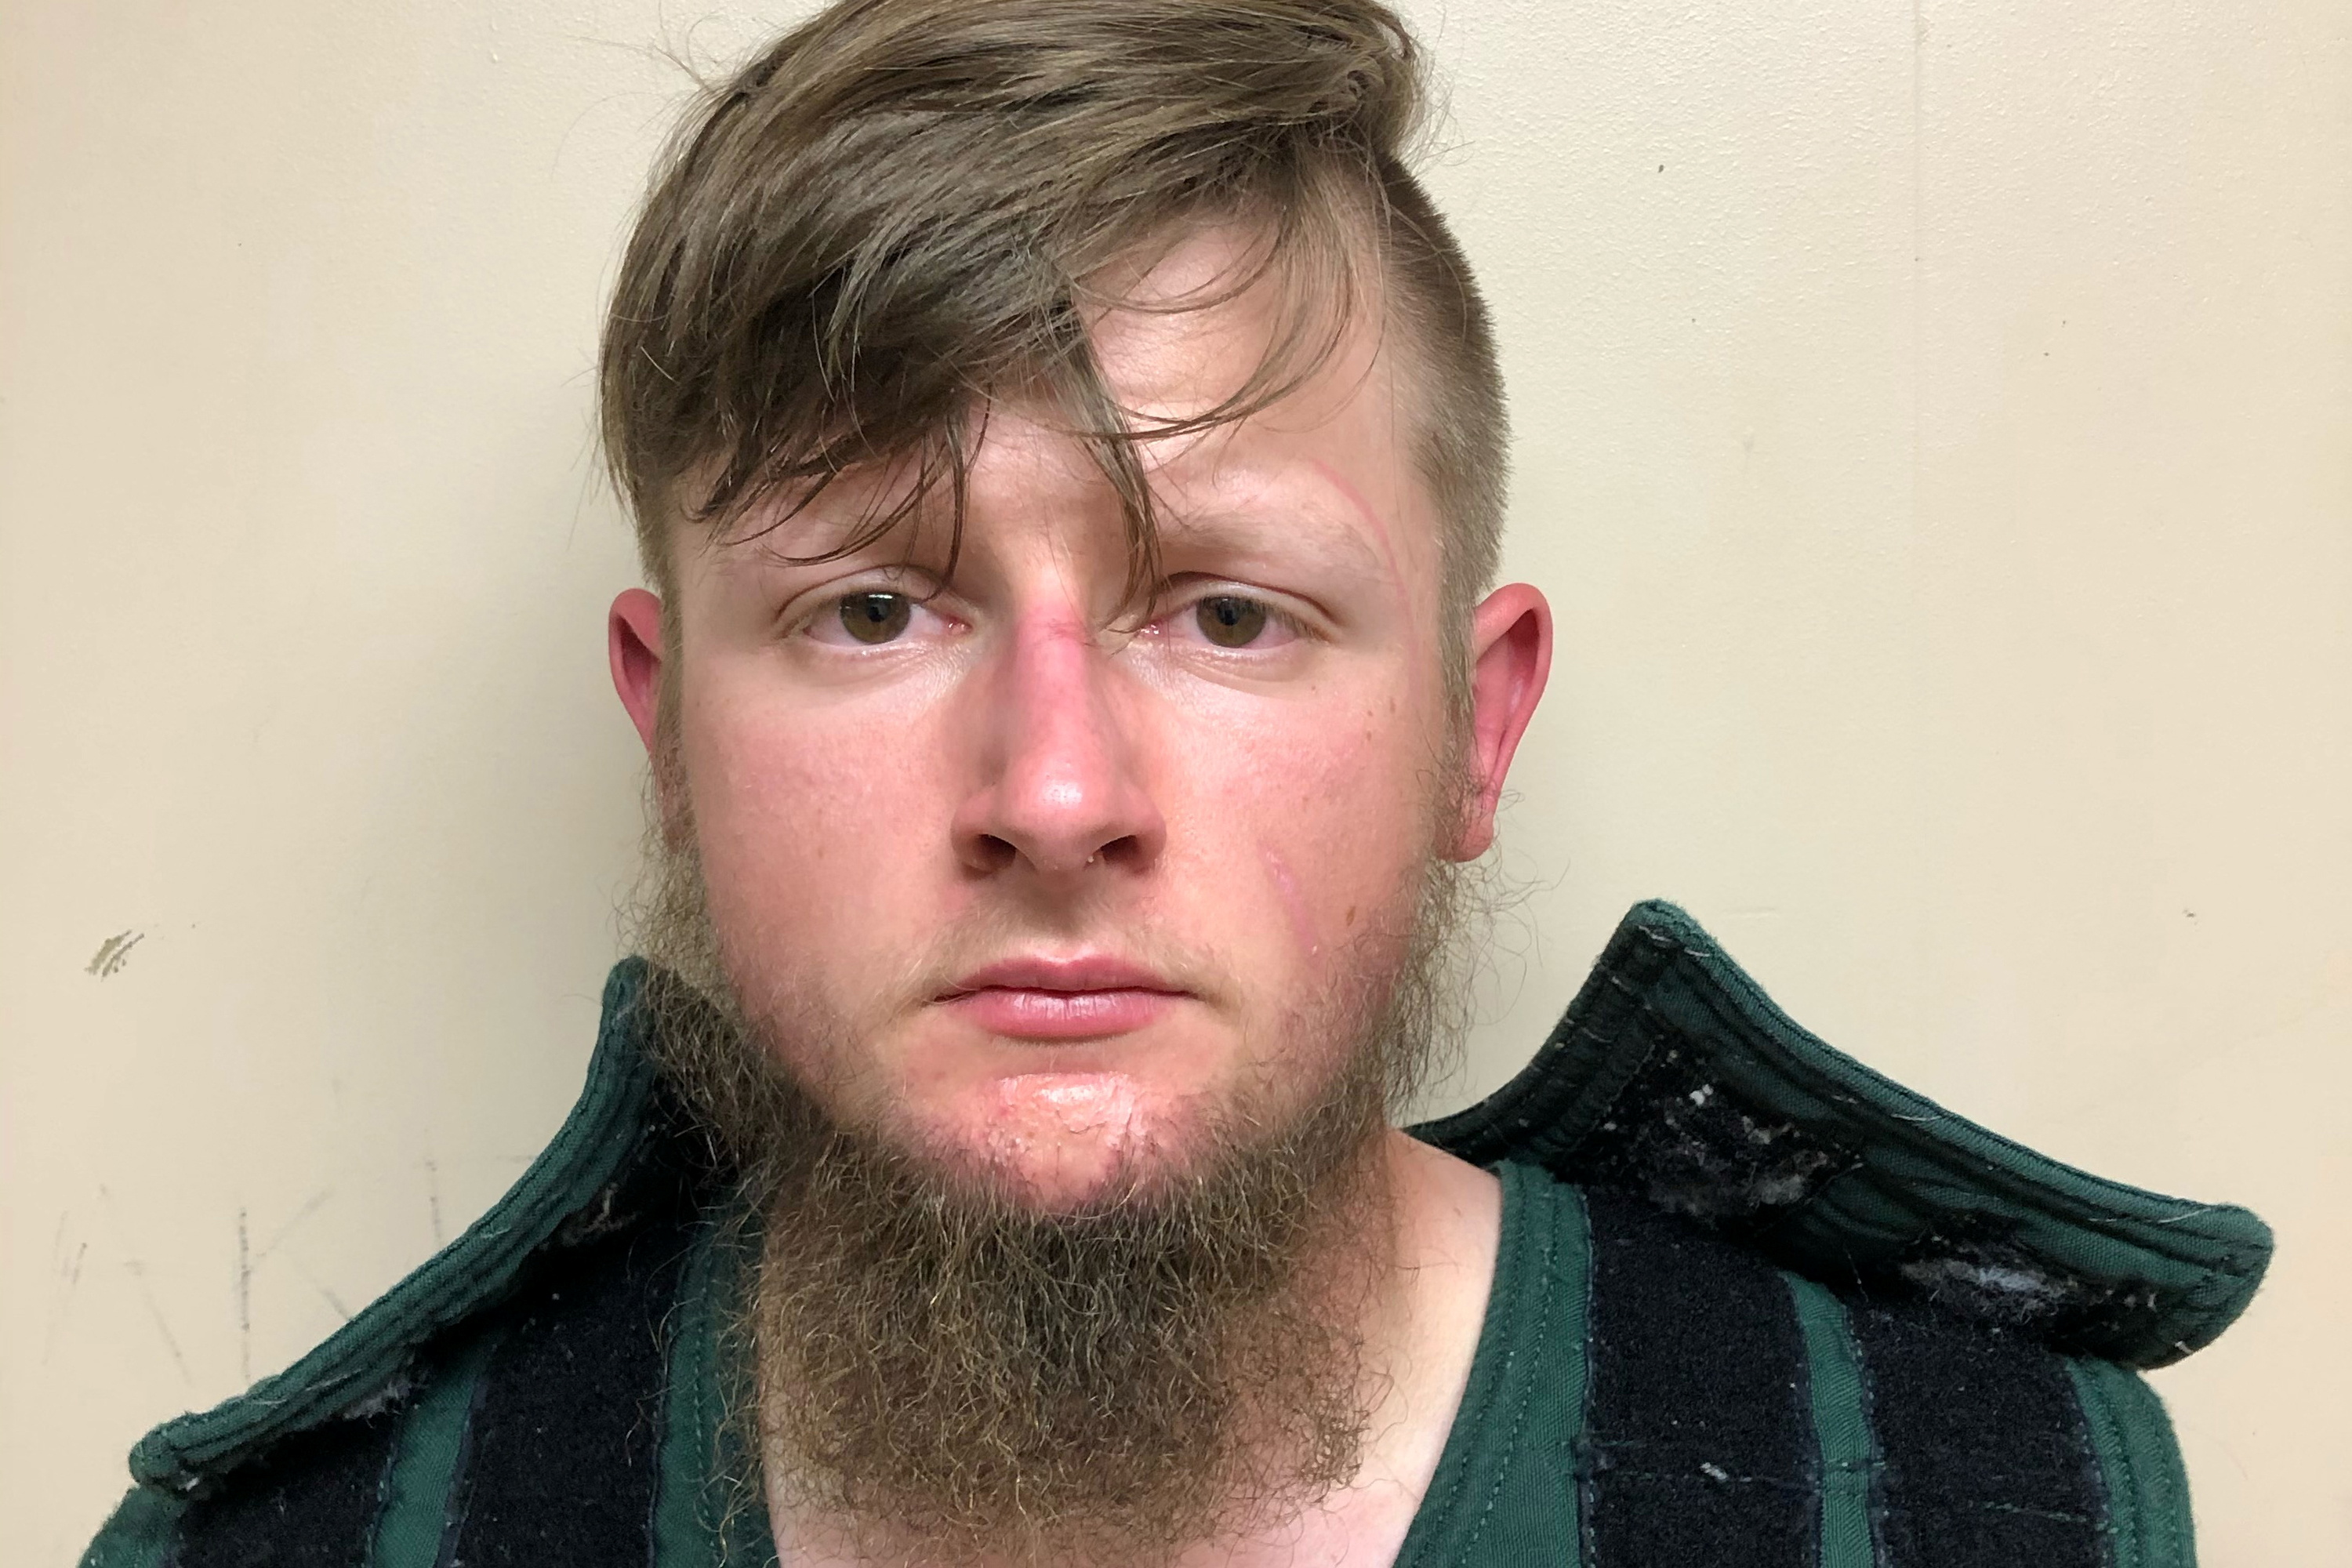 Robert Aaron Long, 21, poses in a jail booking photograph after he was taken into custody by the Crisp County Sheriff's Office in Cordele